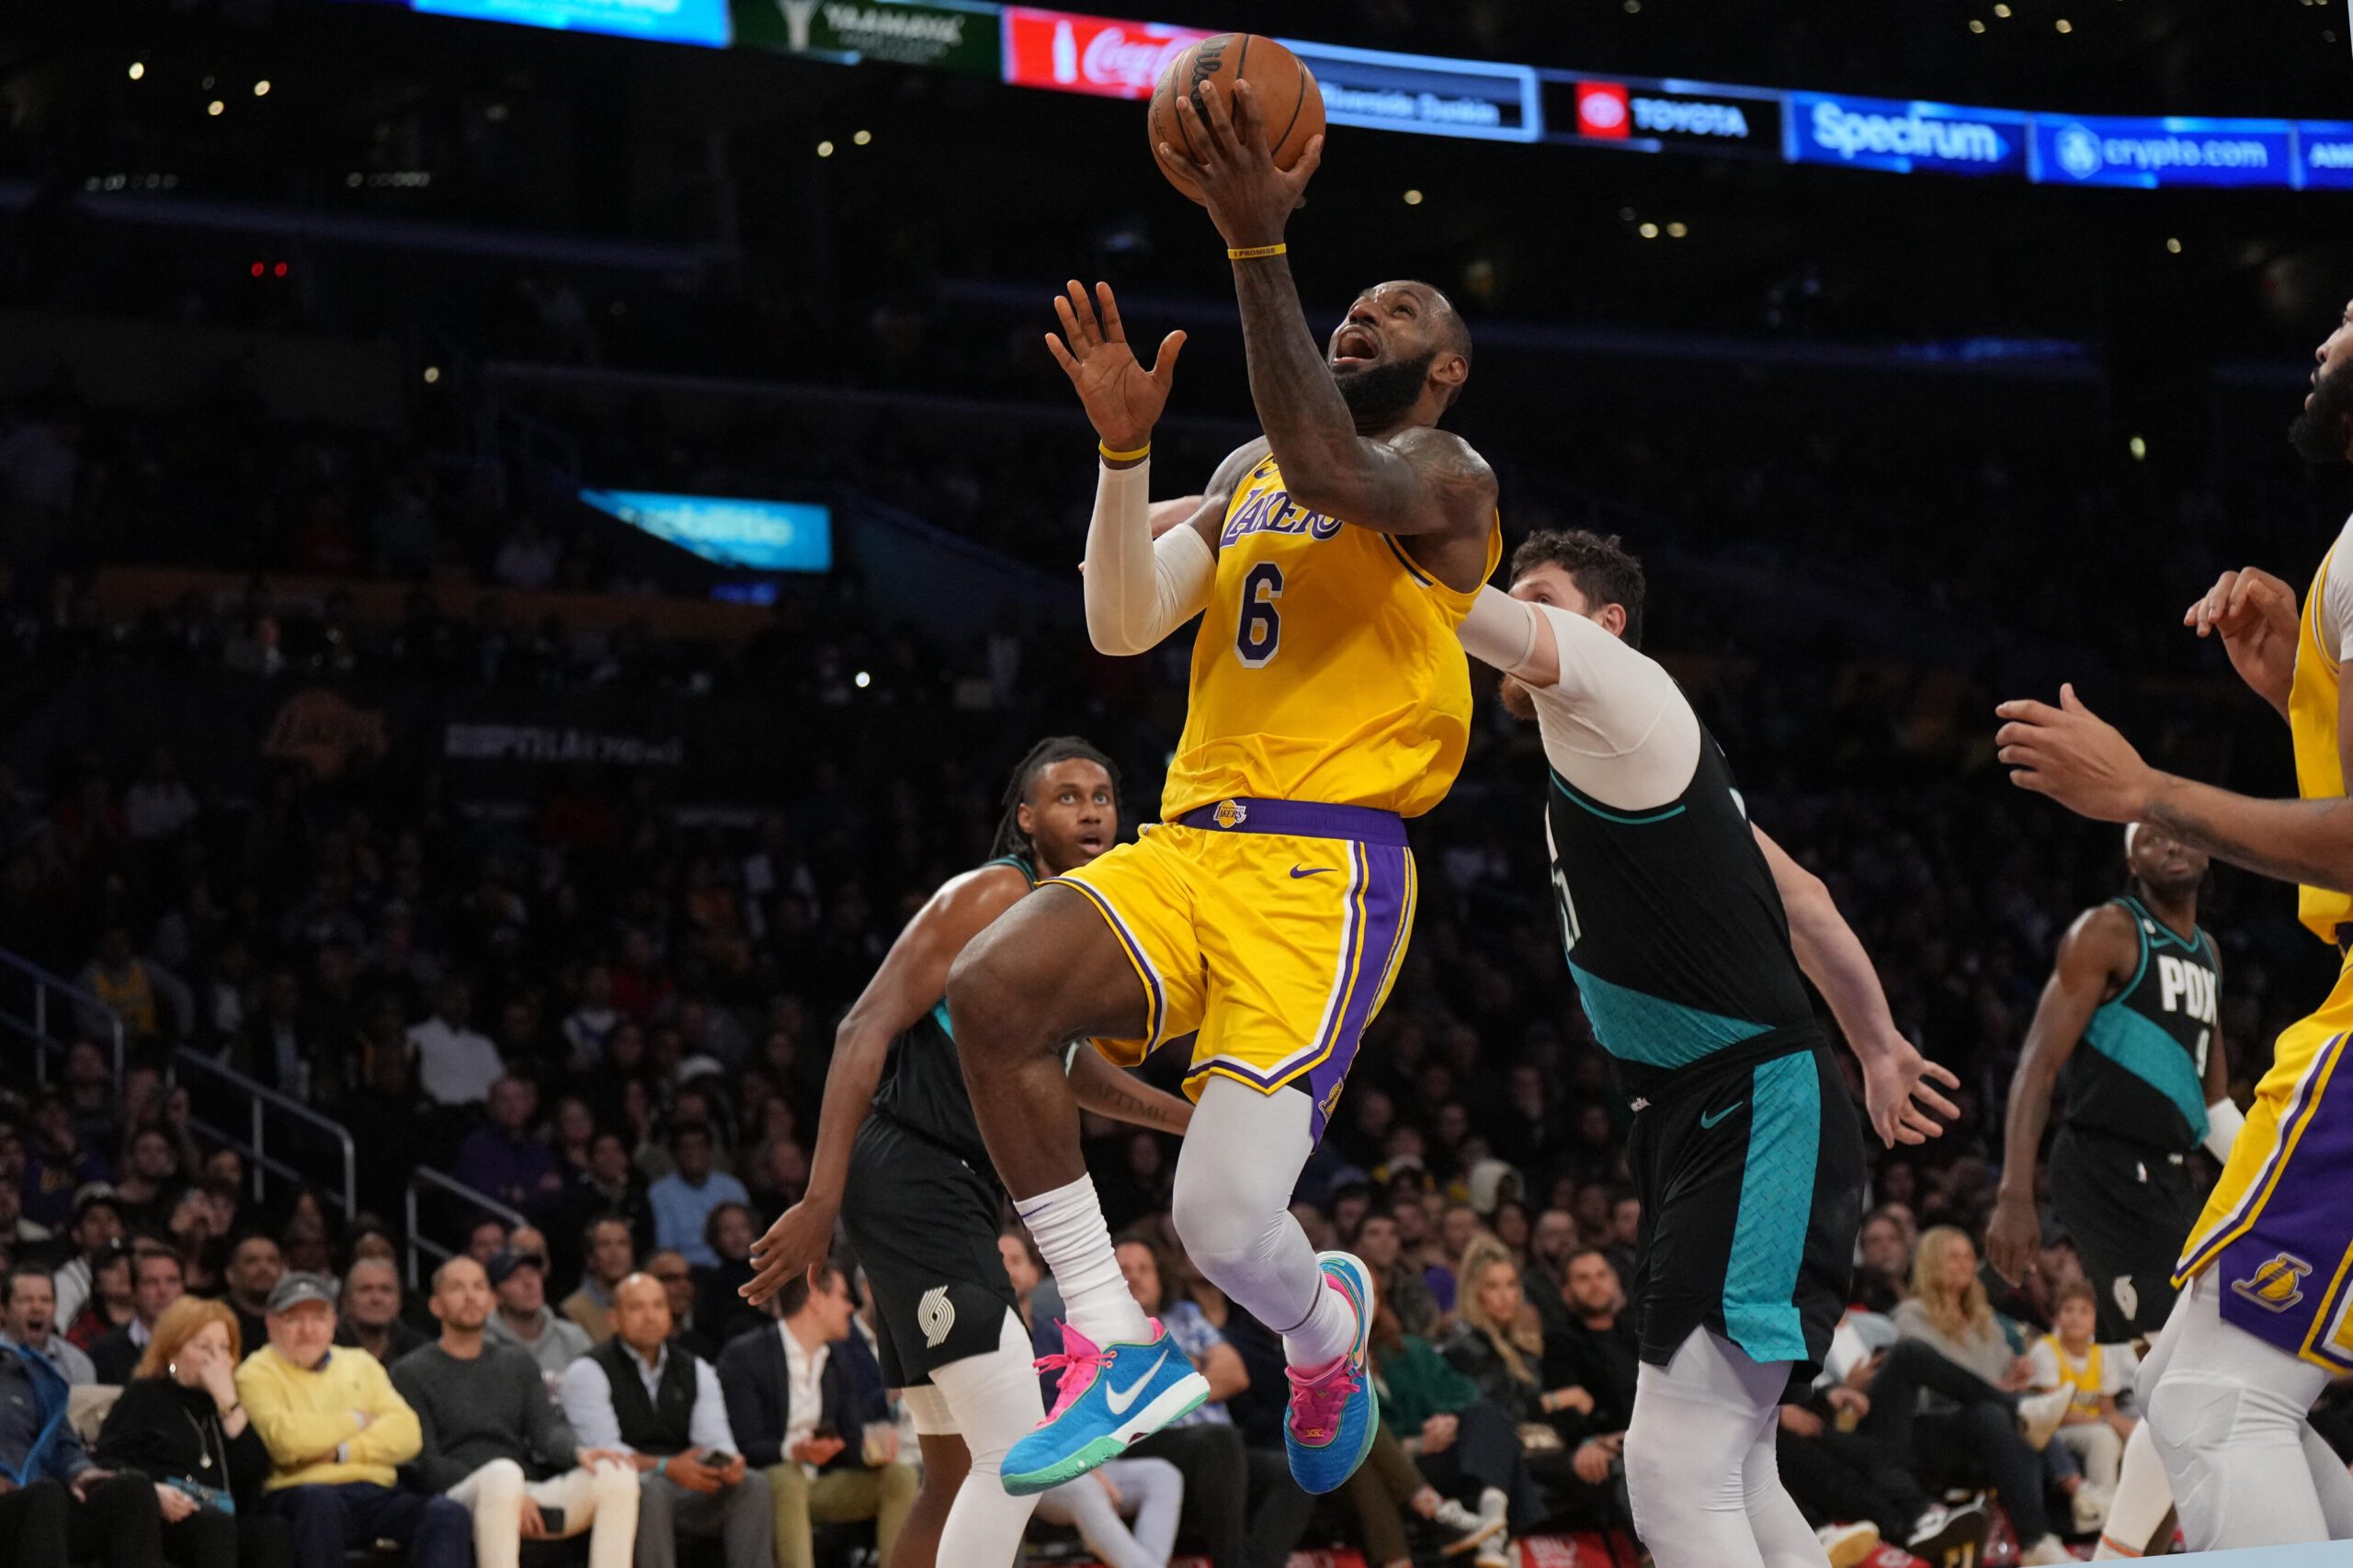 No blown lead this time as Lakers rout Blazers